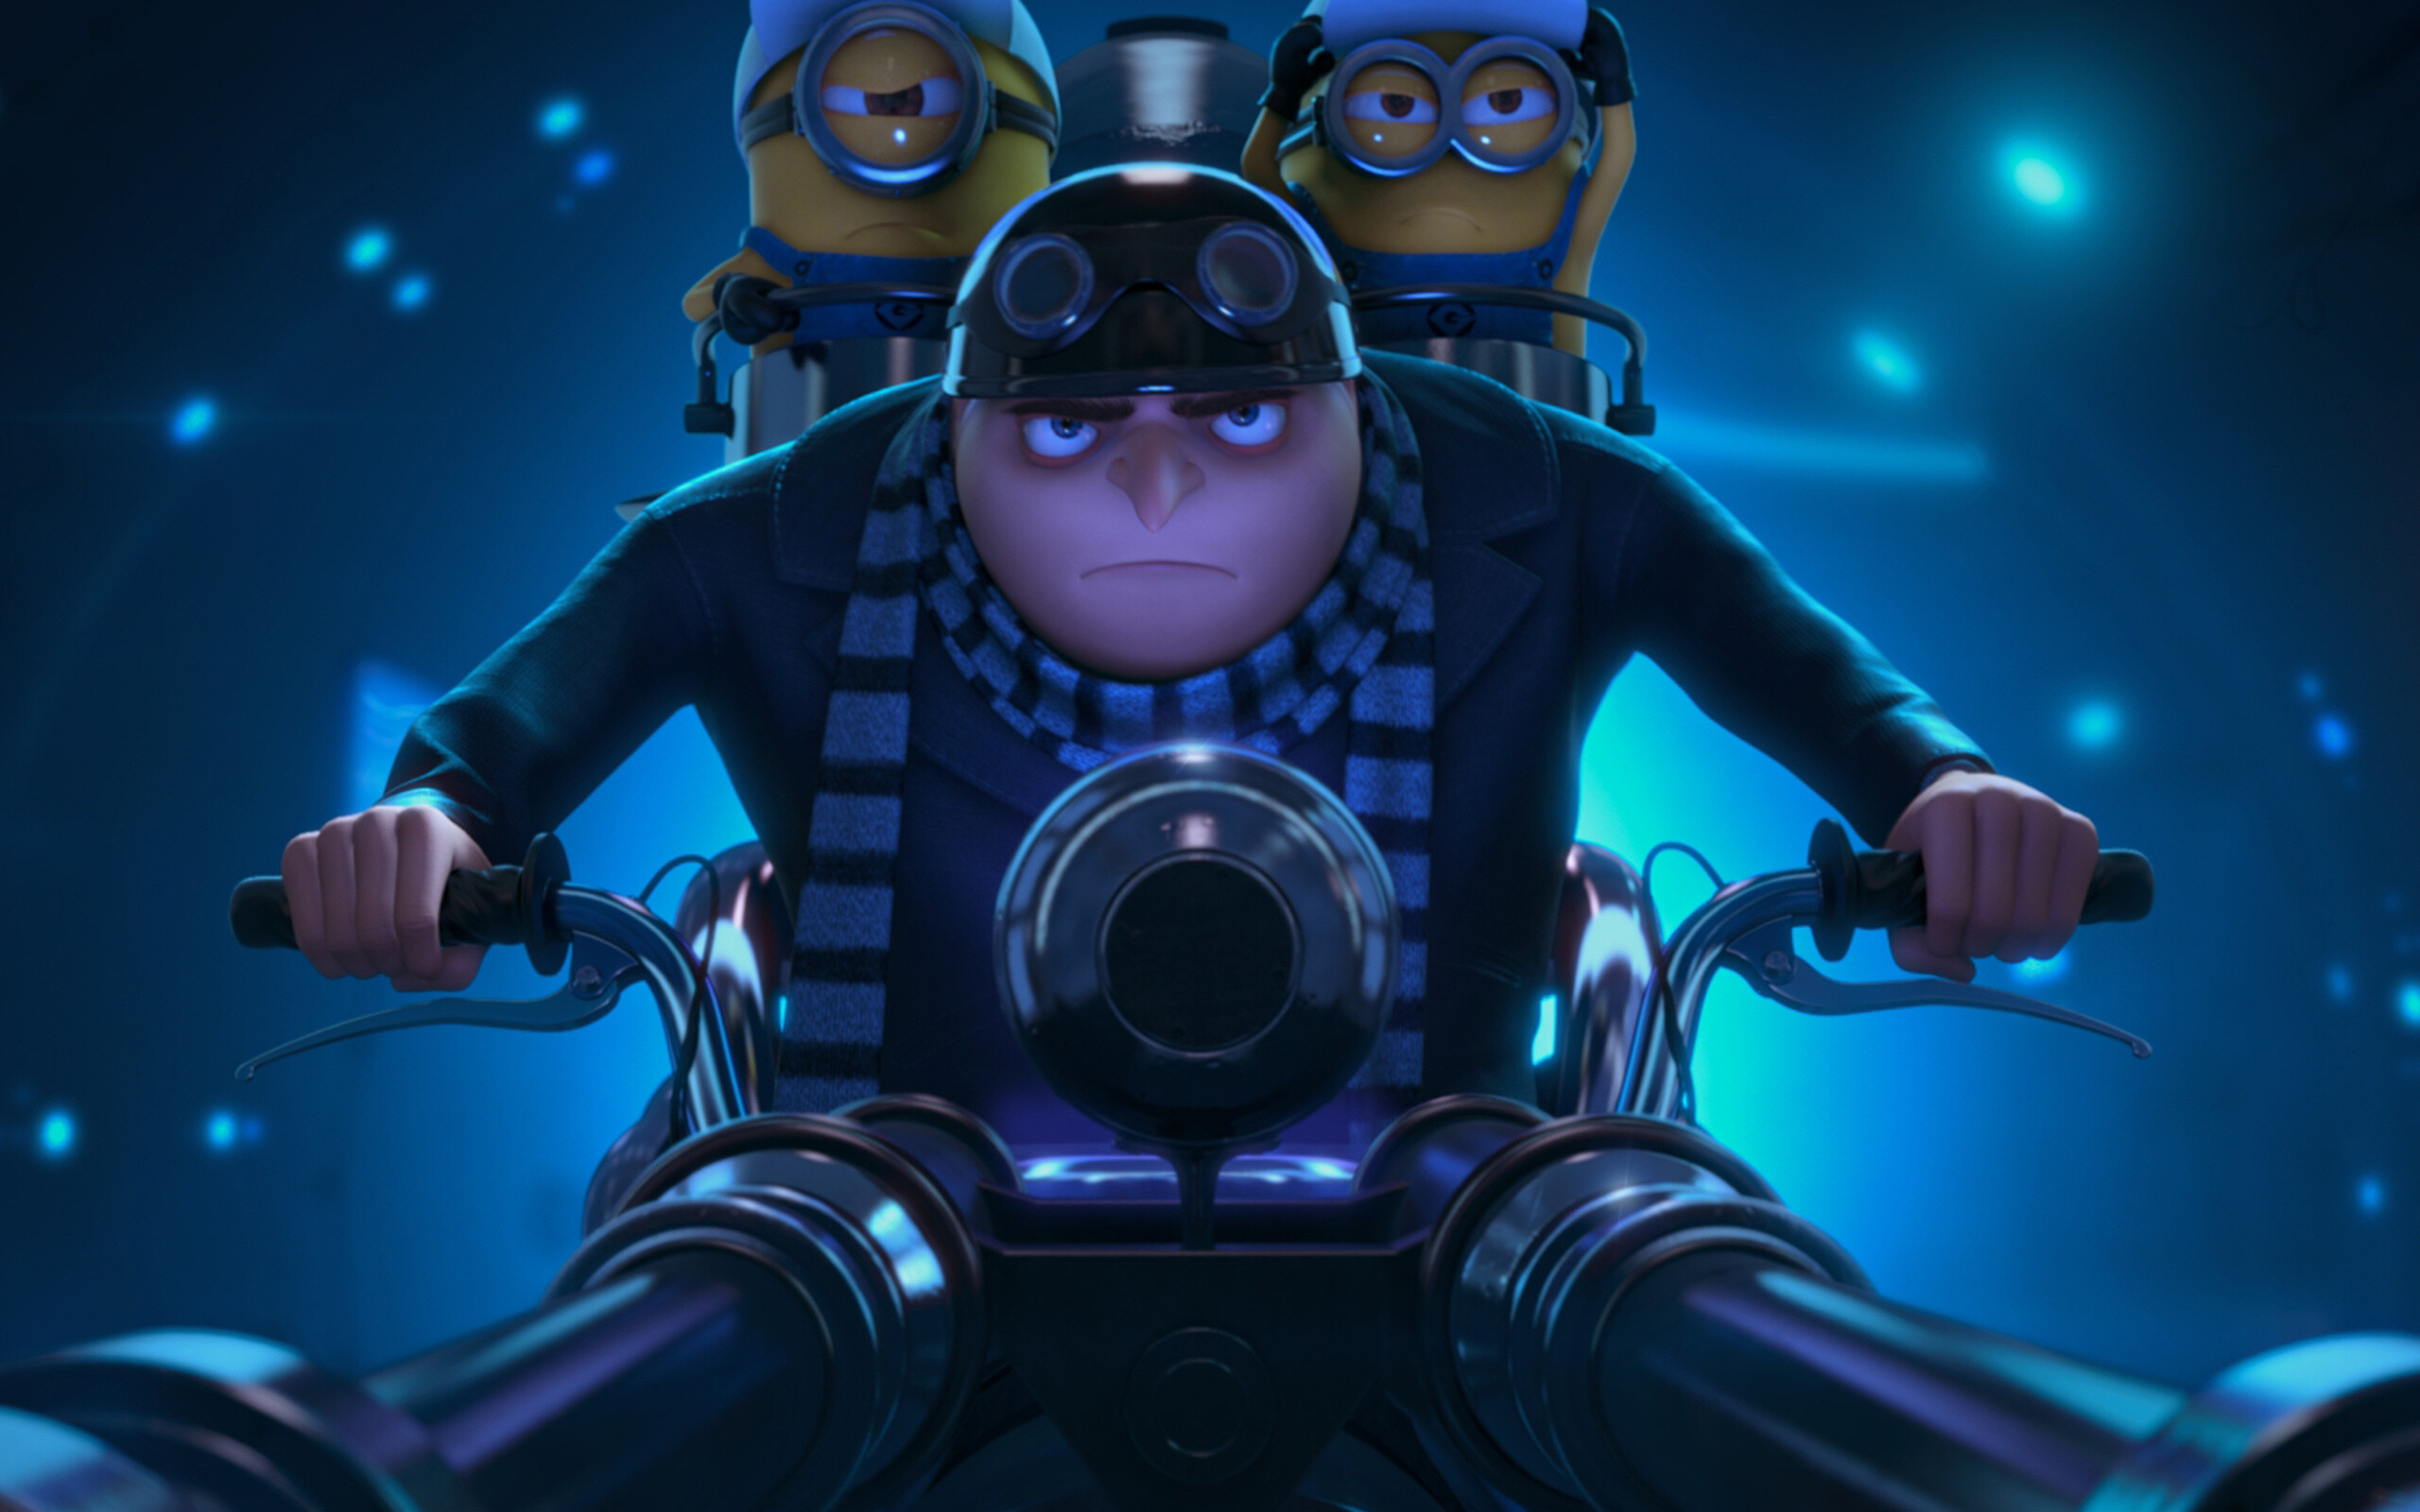 Despicable Me: Steve Carell as Gru, a former supervillain turned dad, Minions. 2560x1600 HD Wallpaper.